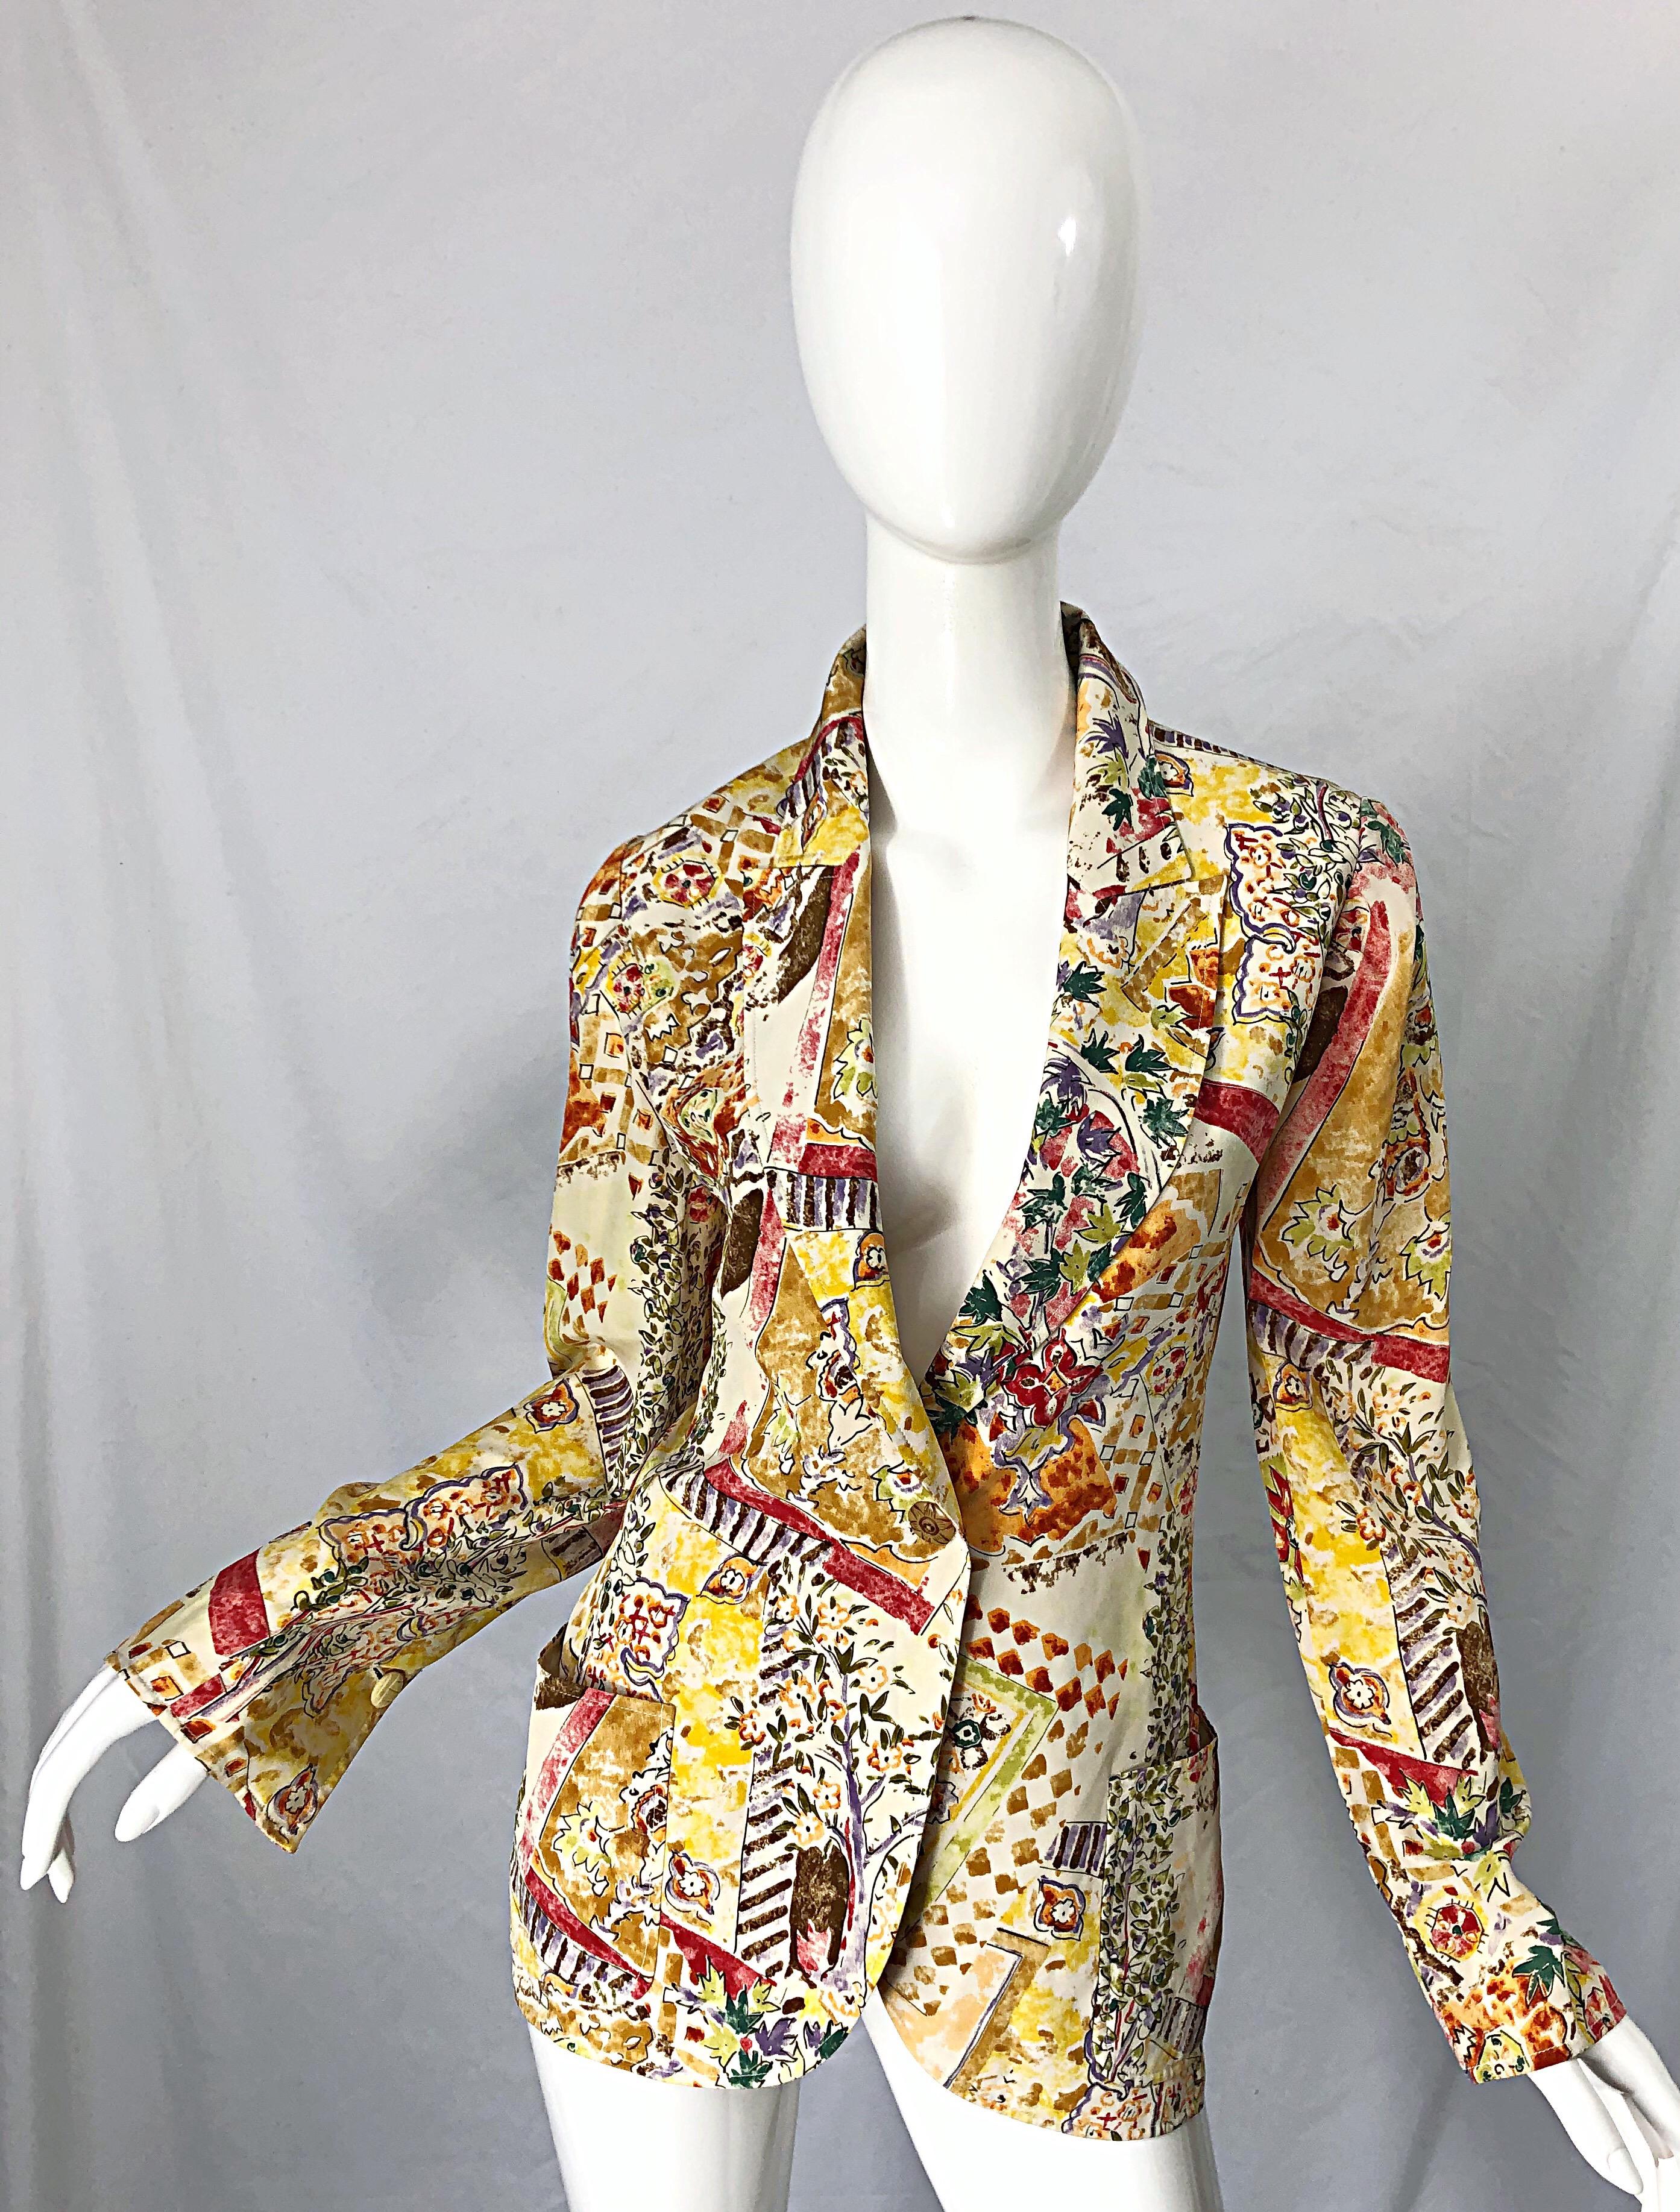 Chic mid 90s EMANUEL UNGARO garden flower print silk blazer jacket ! Features vibrant colors of yellow, green, purple, burgundy, orange, and ivory throughout. Single button closure. Pockets at each side of the waist. Perfect layered or alone. 
In